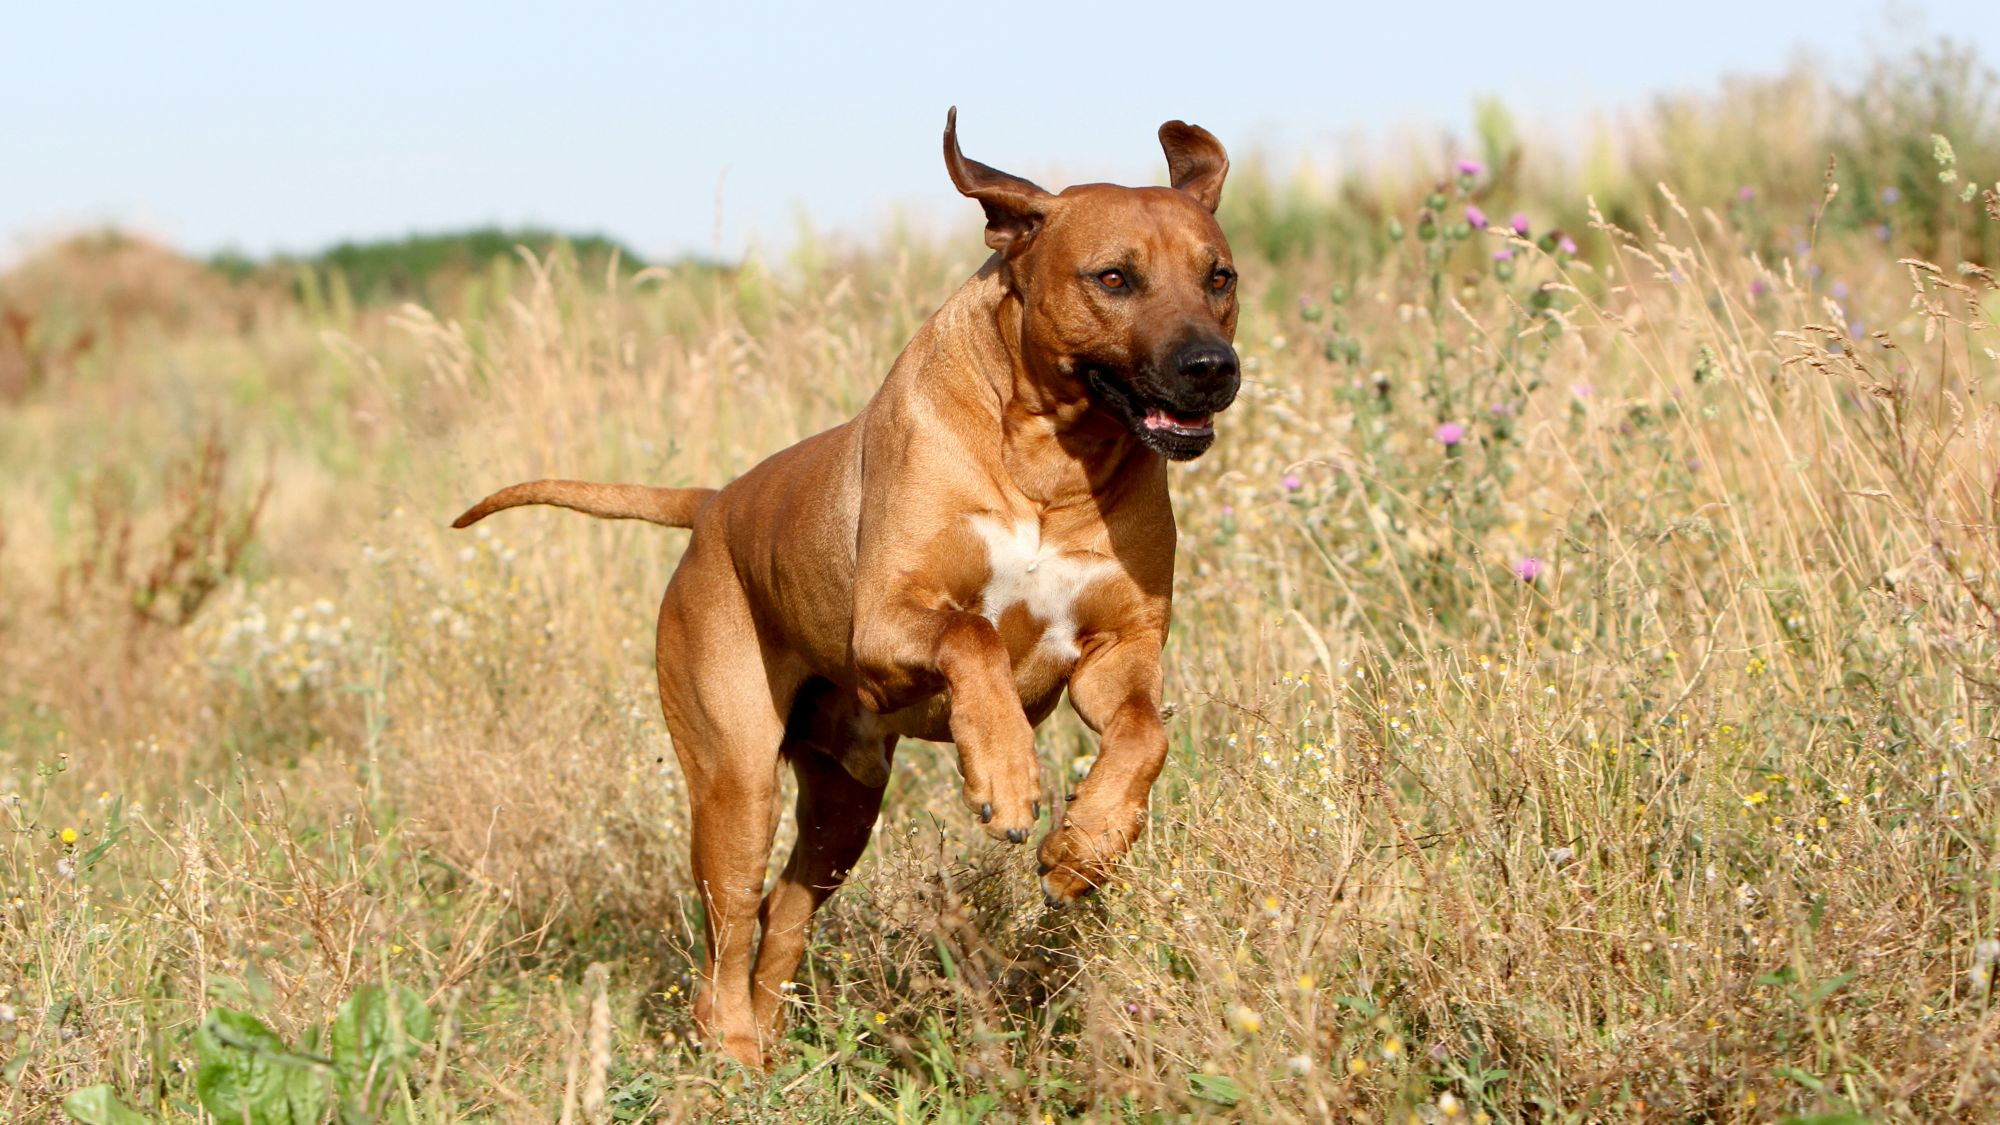 Rhodesian Ridgeback leaping over field of dried grass and purple flowers